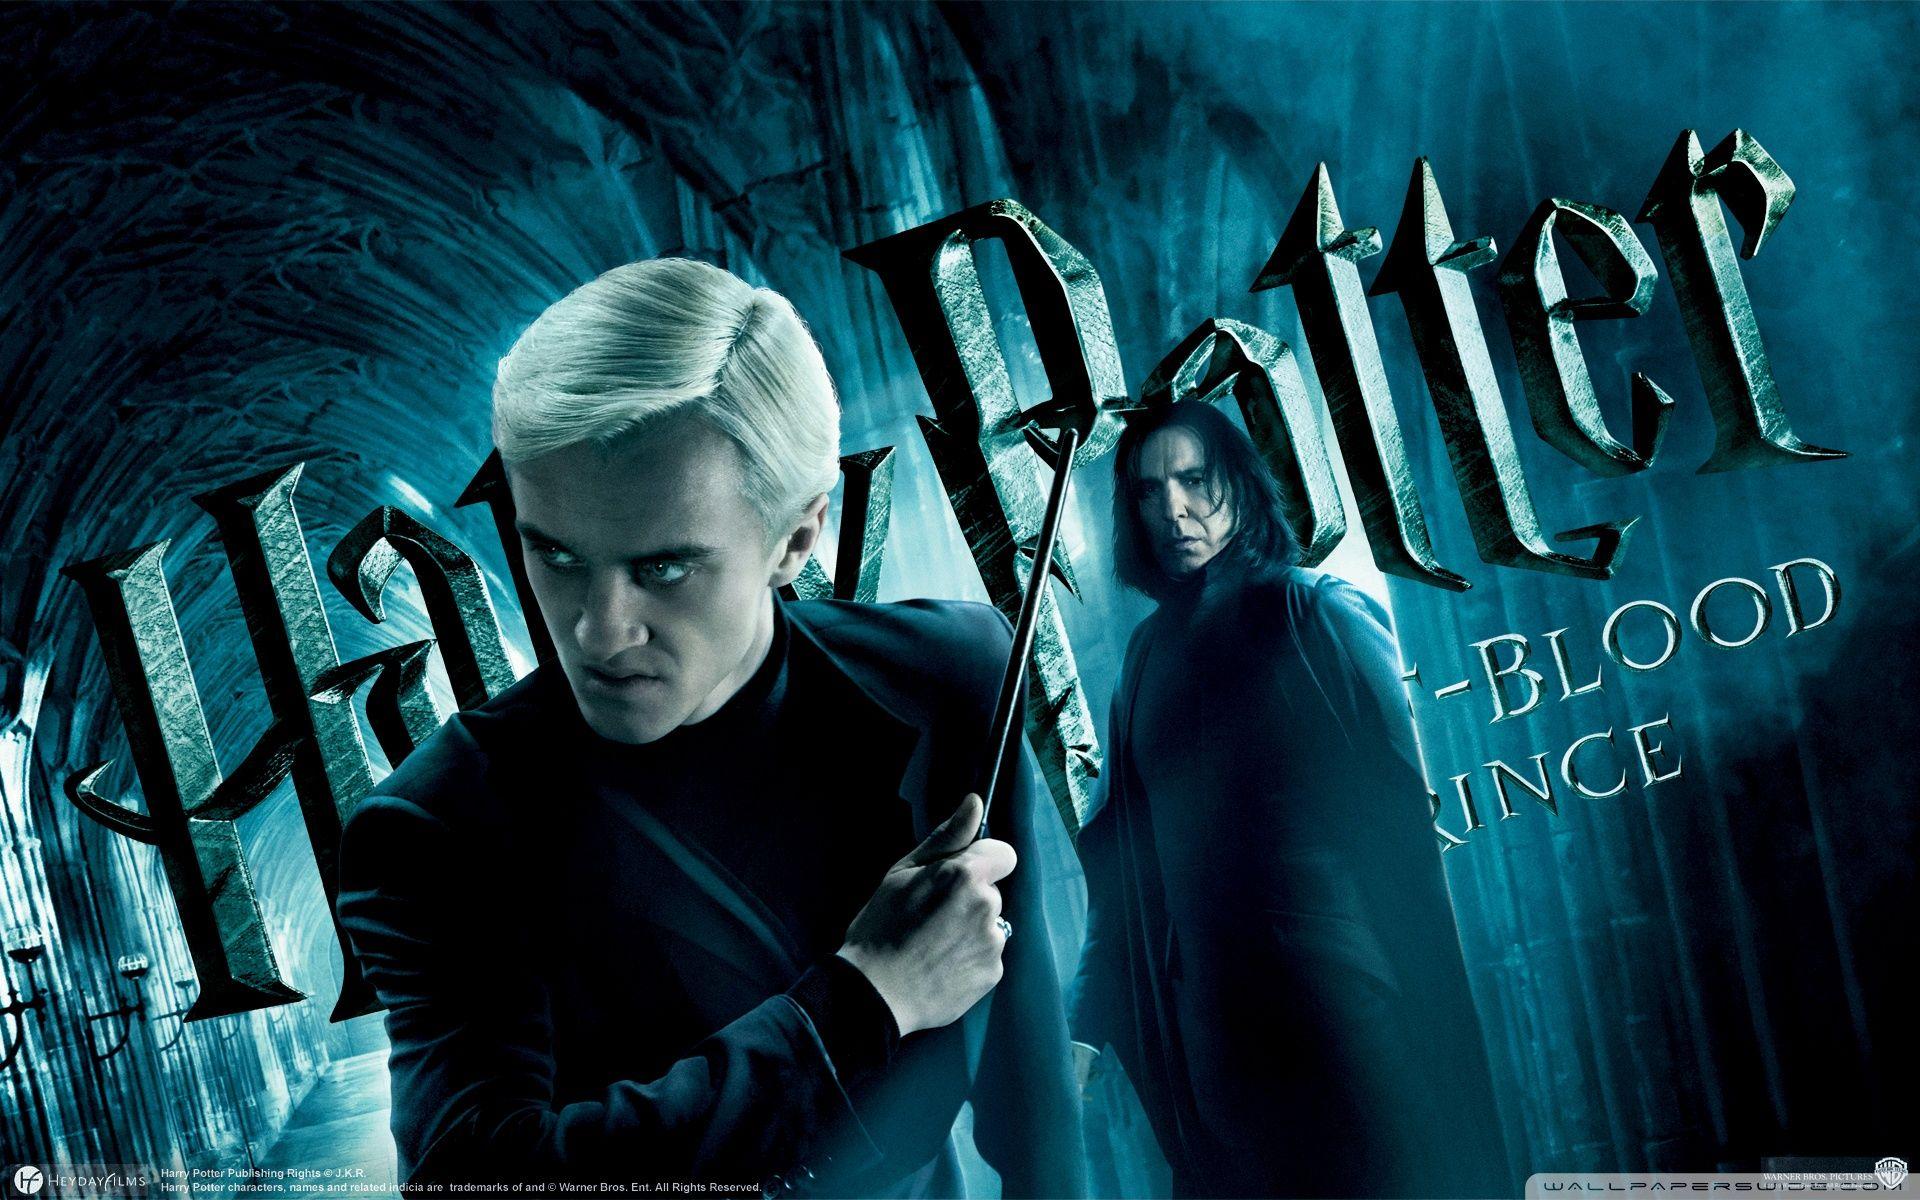 Harry Potter All Characters Wallpapers Top Free Harry